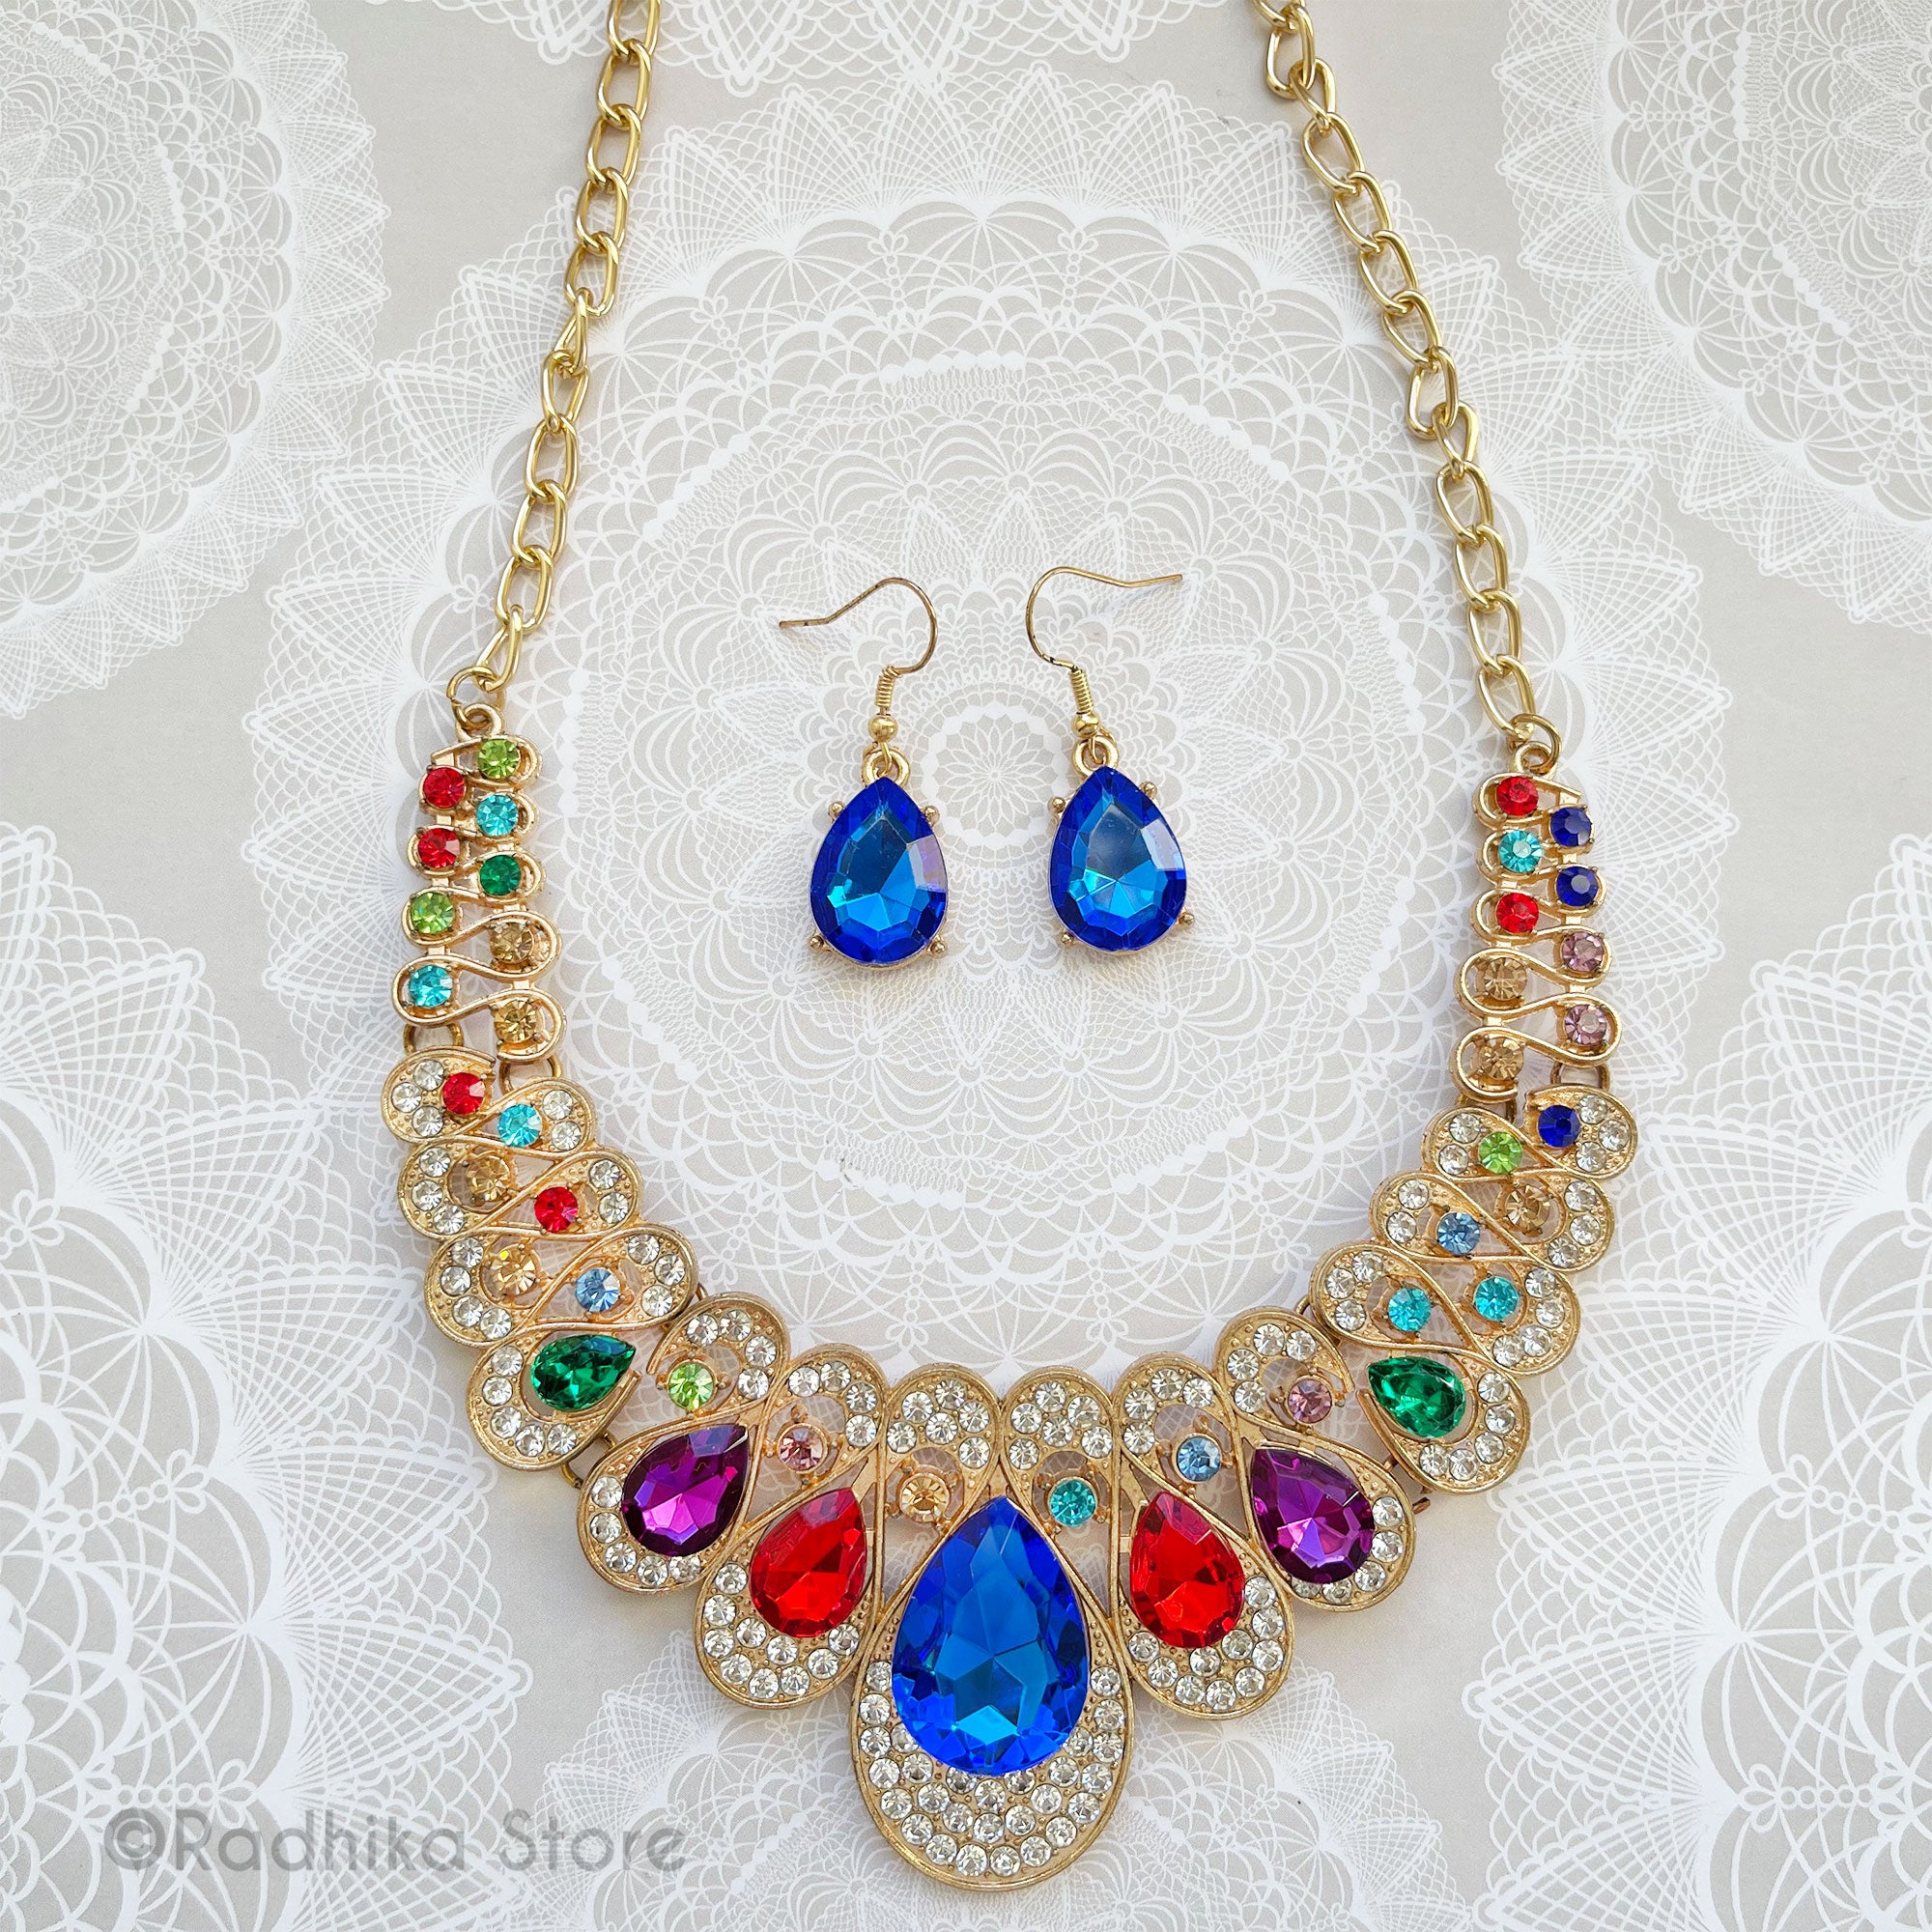 Multi Color Crystal Teardrops - Deity Collar Necklace and Earring Set